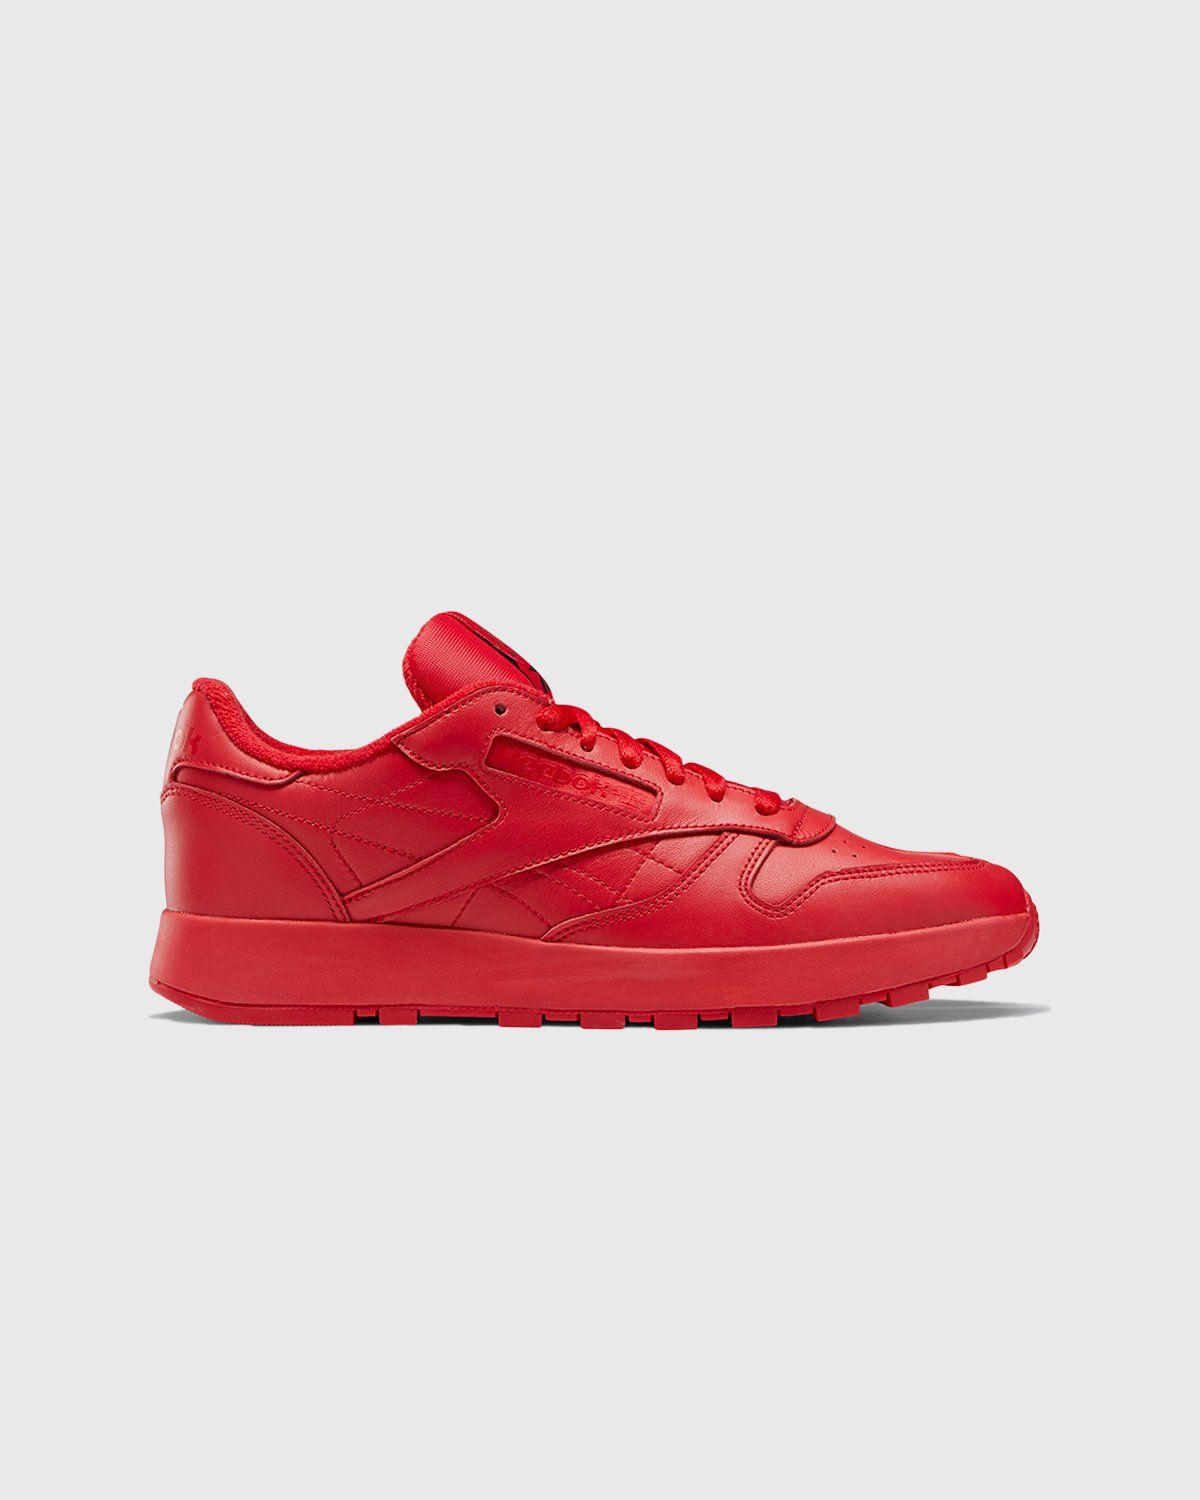 Maison Margiela x Reebok – Classic Leather Tabi Red - Sneakers - Red - Image 1